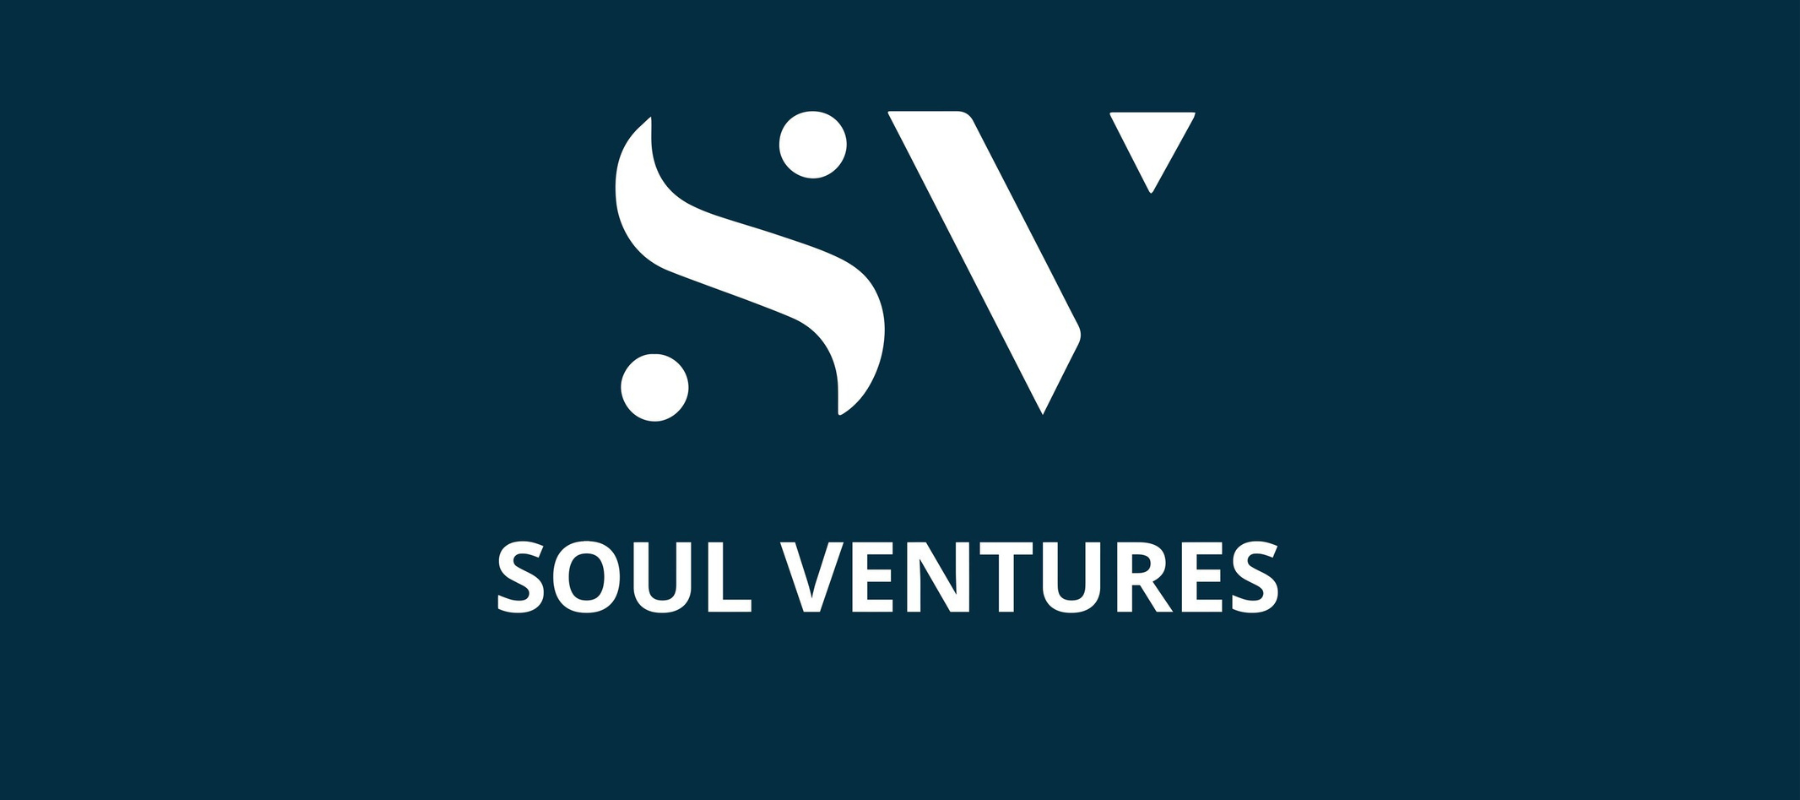 Venture capital firm Soul Ventures launches in Japan to expand its global network